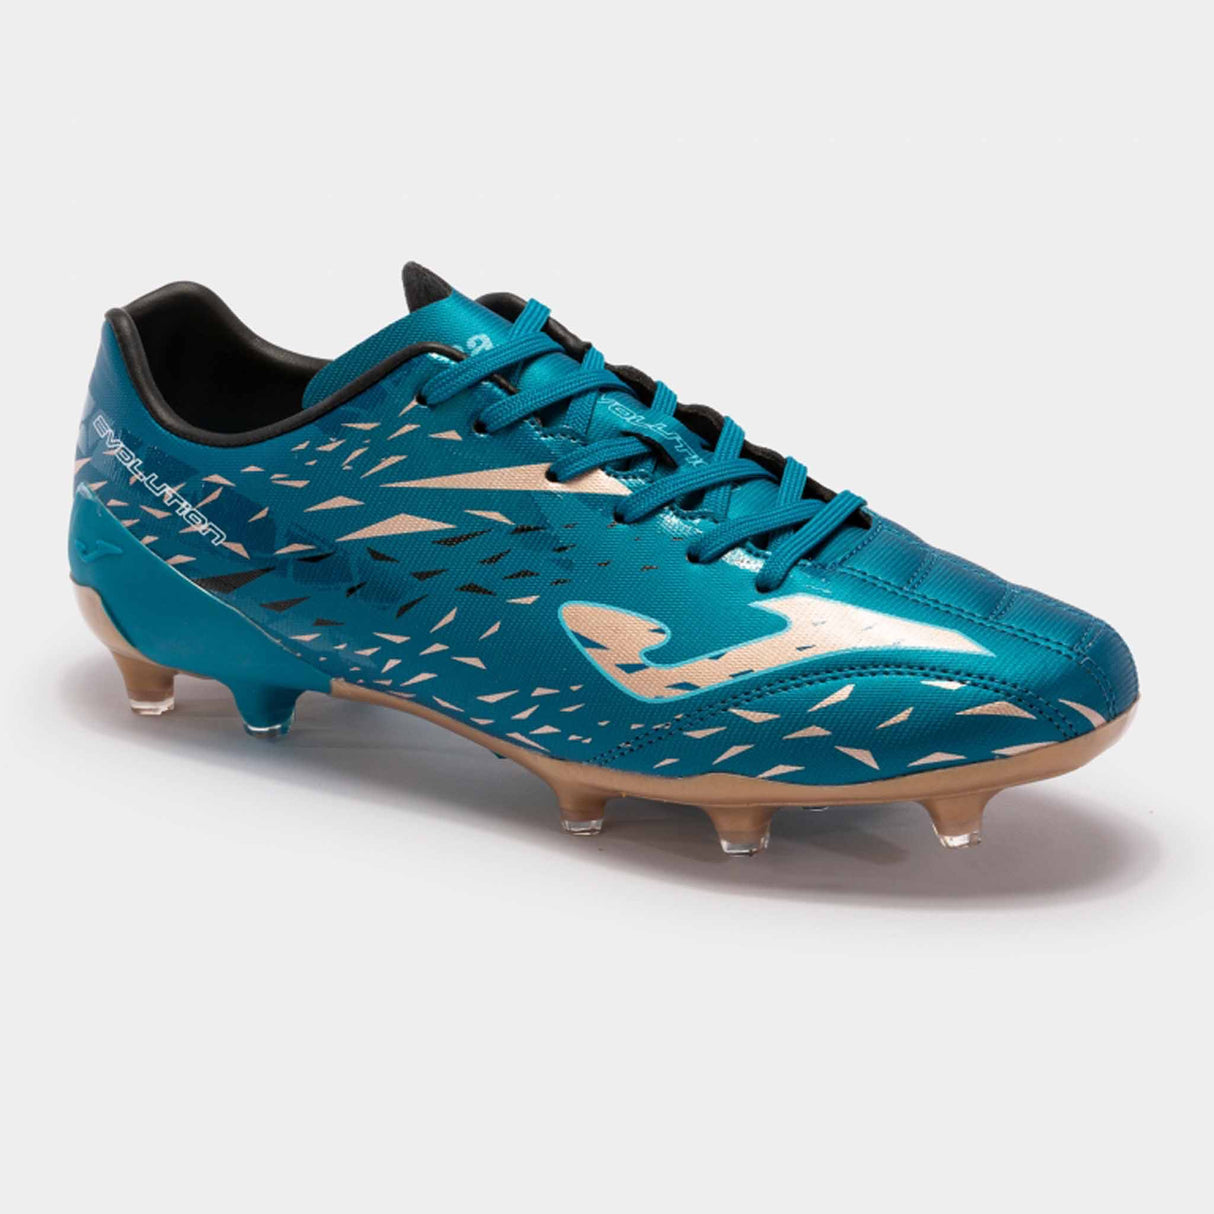 Joma Evolution Cup FG chaussures de soccer à crampons adulte - Sarcelle / Or